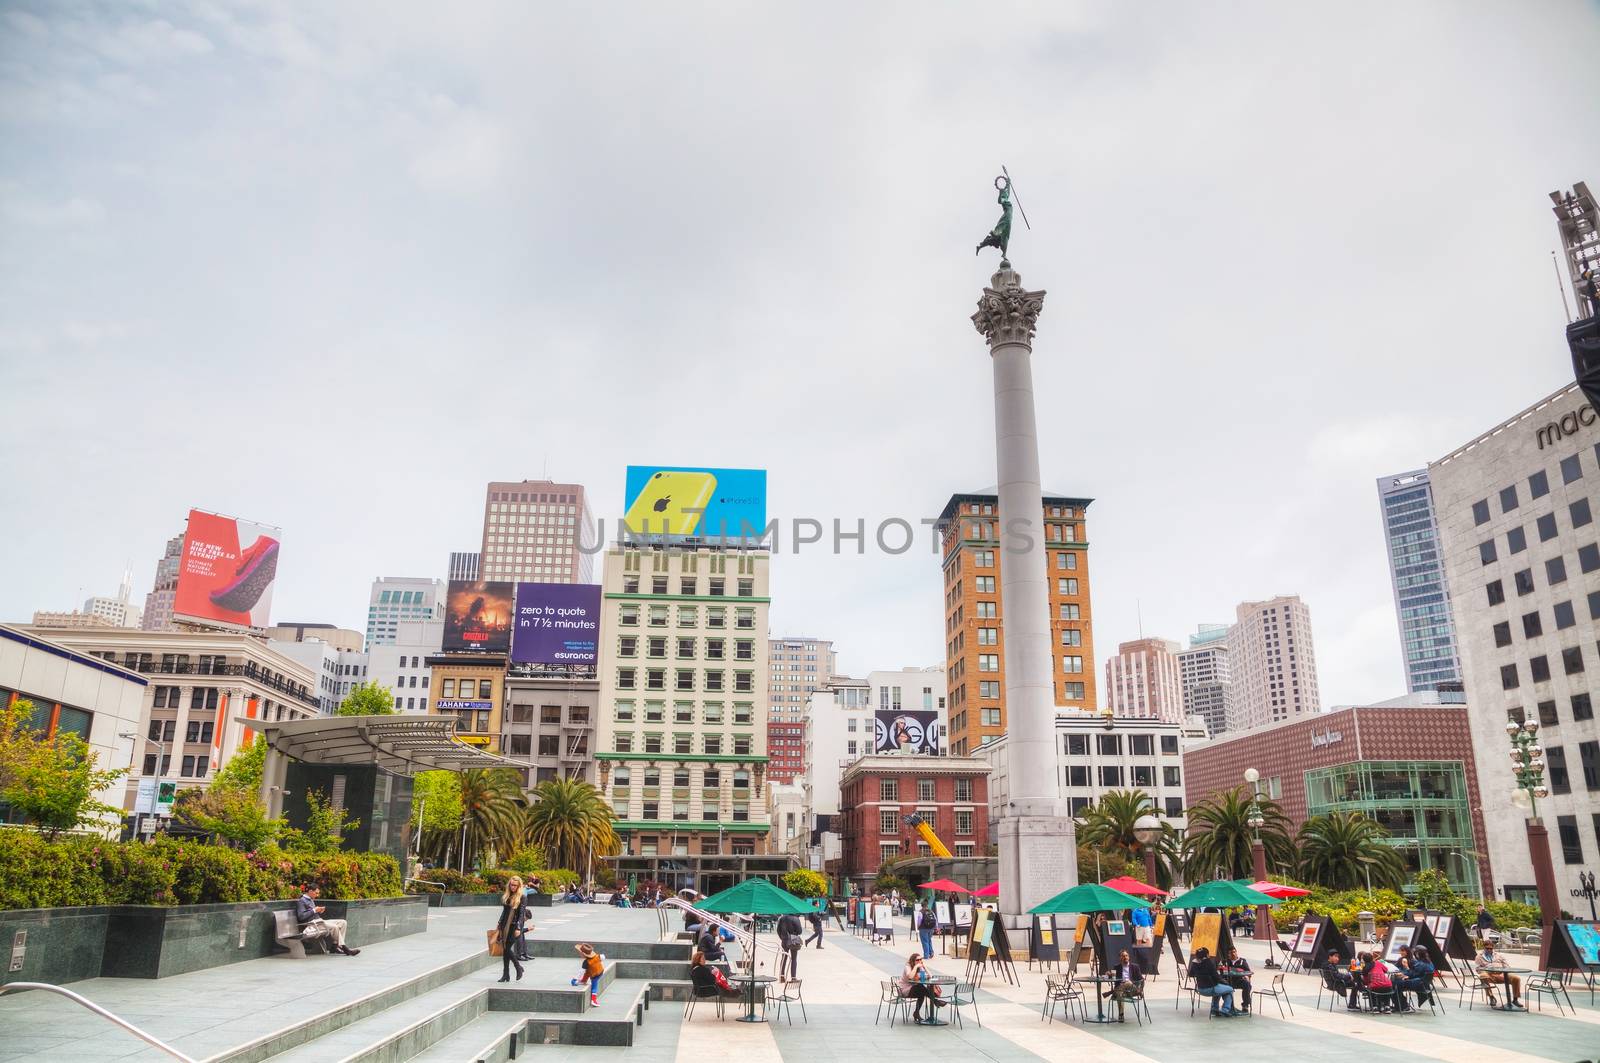 Union Square in San Francisco on a sunny day by AndreyKr